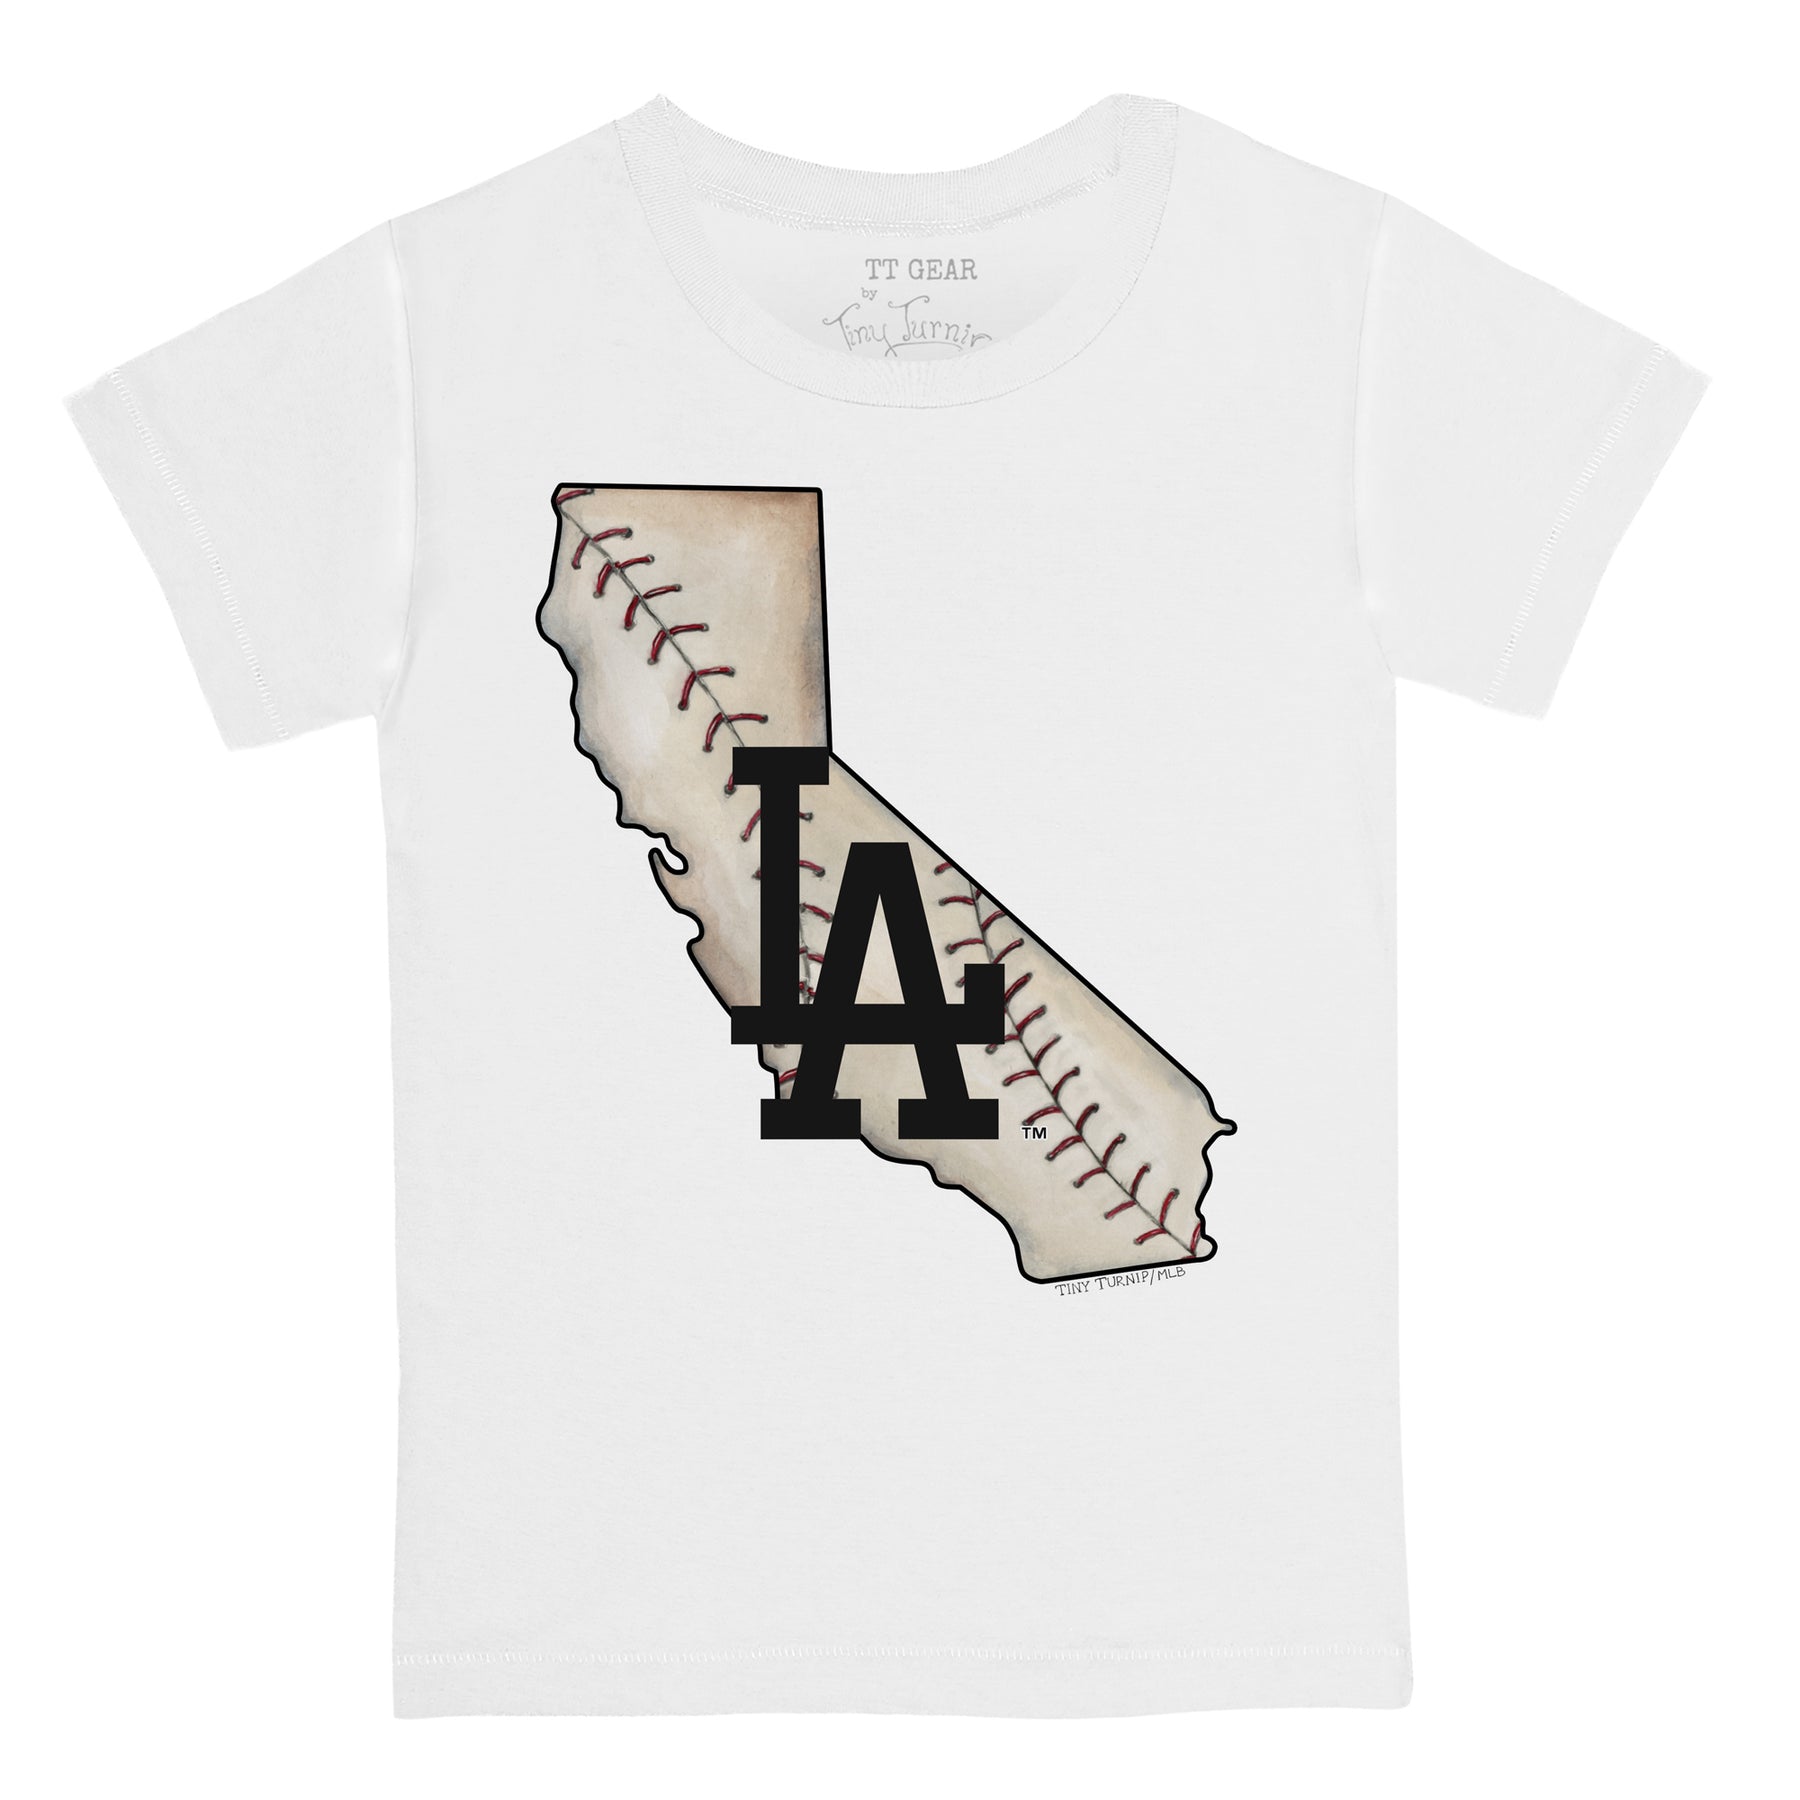 Los Angeles Dodgers Tiny Turnip Toddler Dirt Ball T-Shirt - White